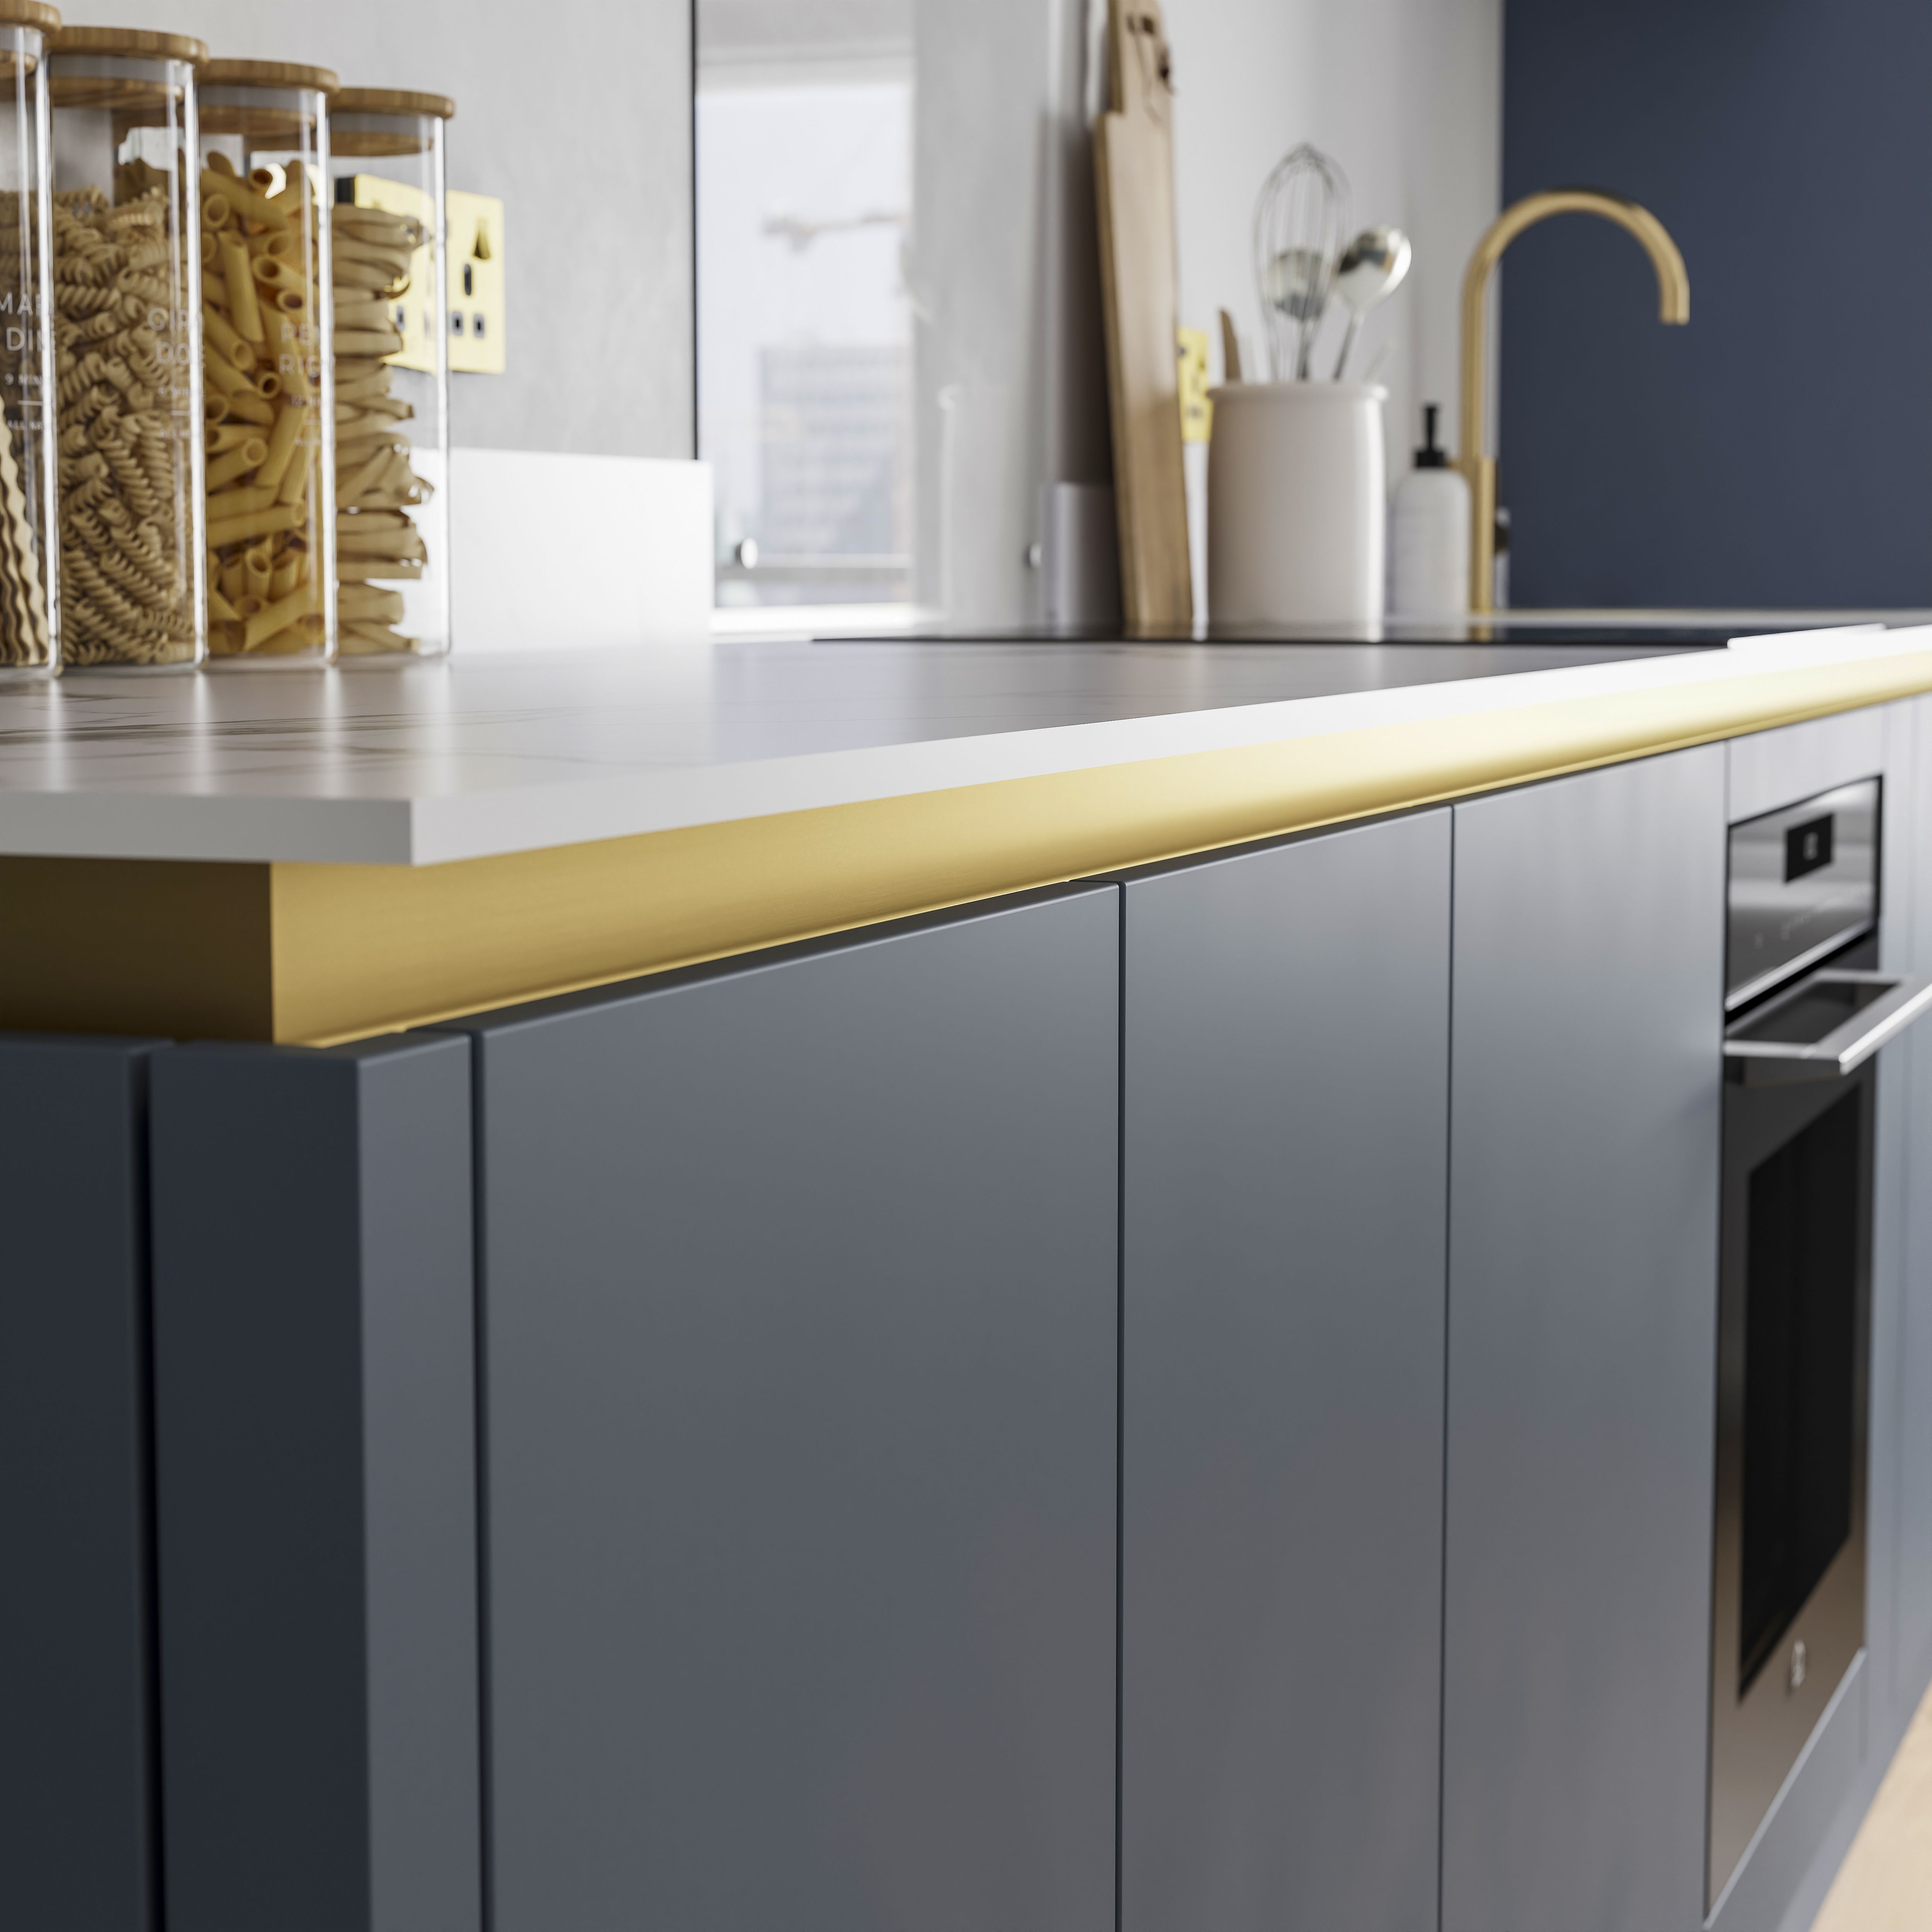 GoodHome Caraway Innovo Handleless Brushed brass effect Under worktop outer corner